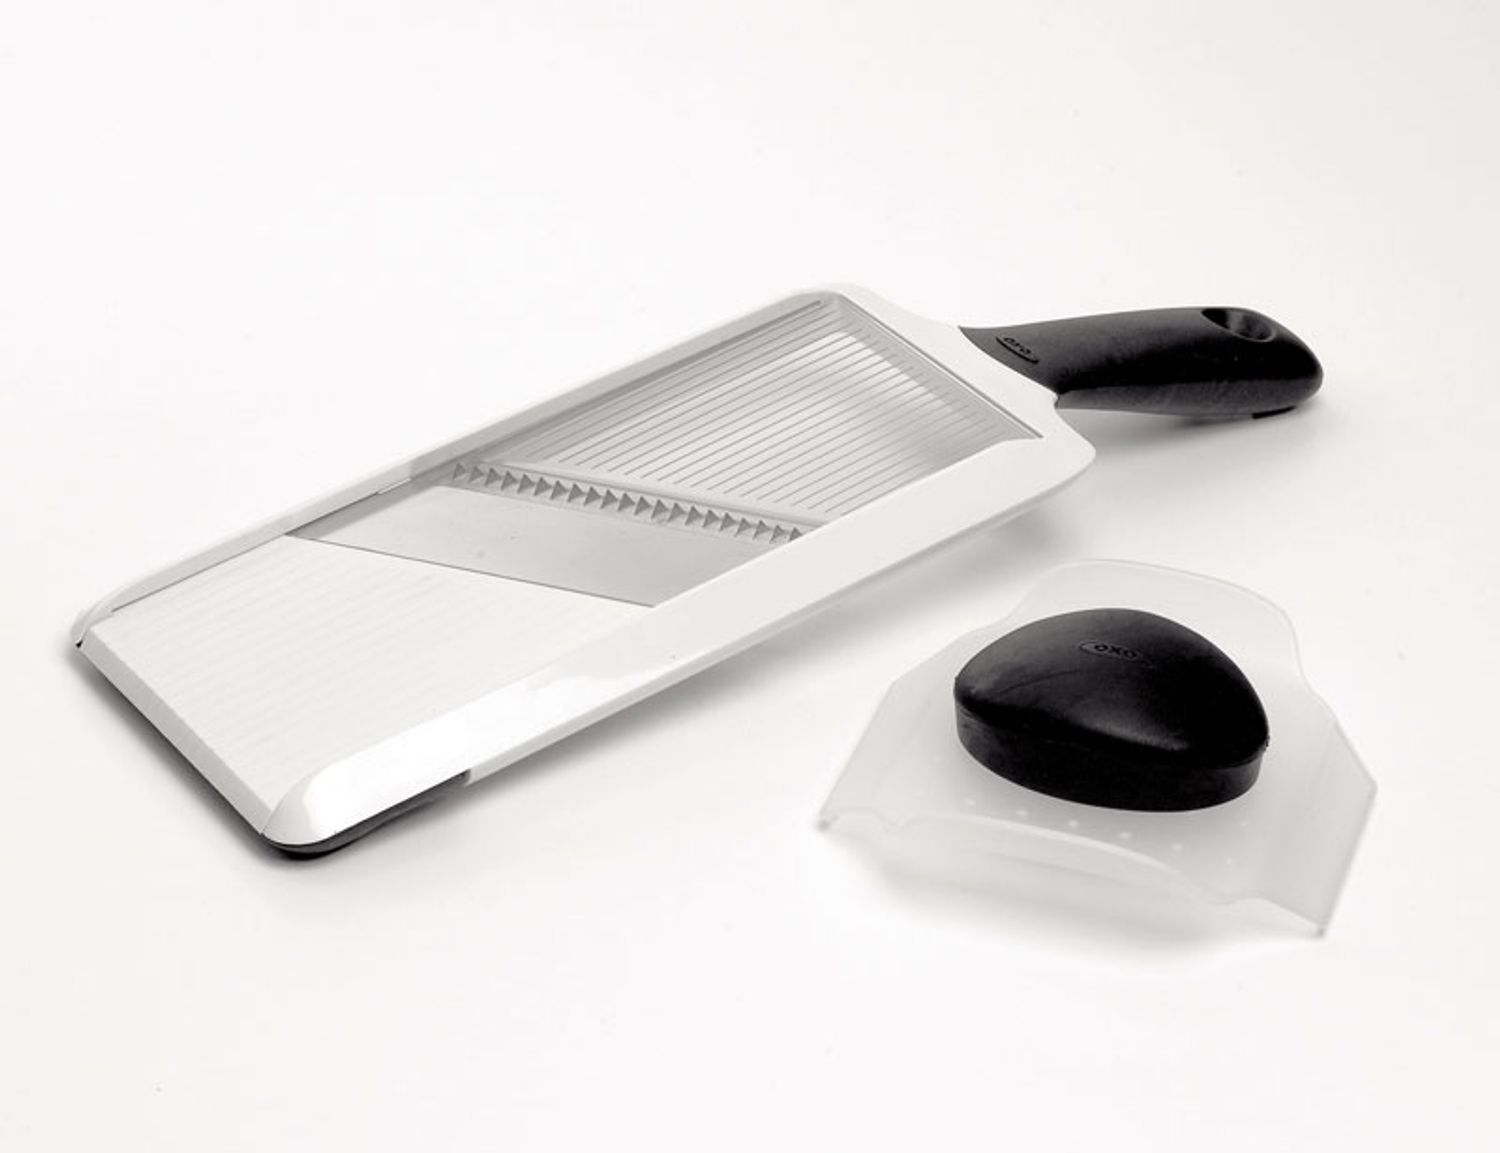 OXO Grips Held Slicer - KnifeCenter - OXO1119200 Discontinued